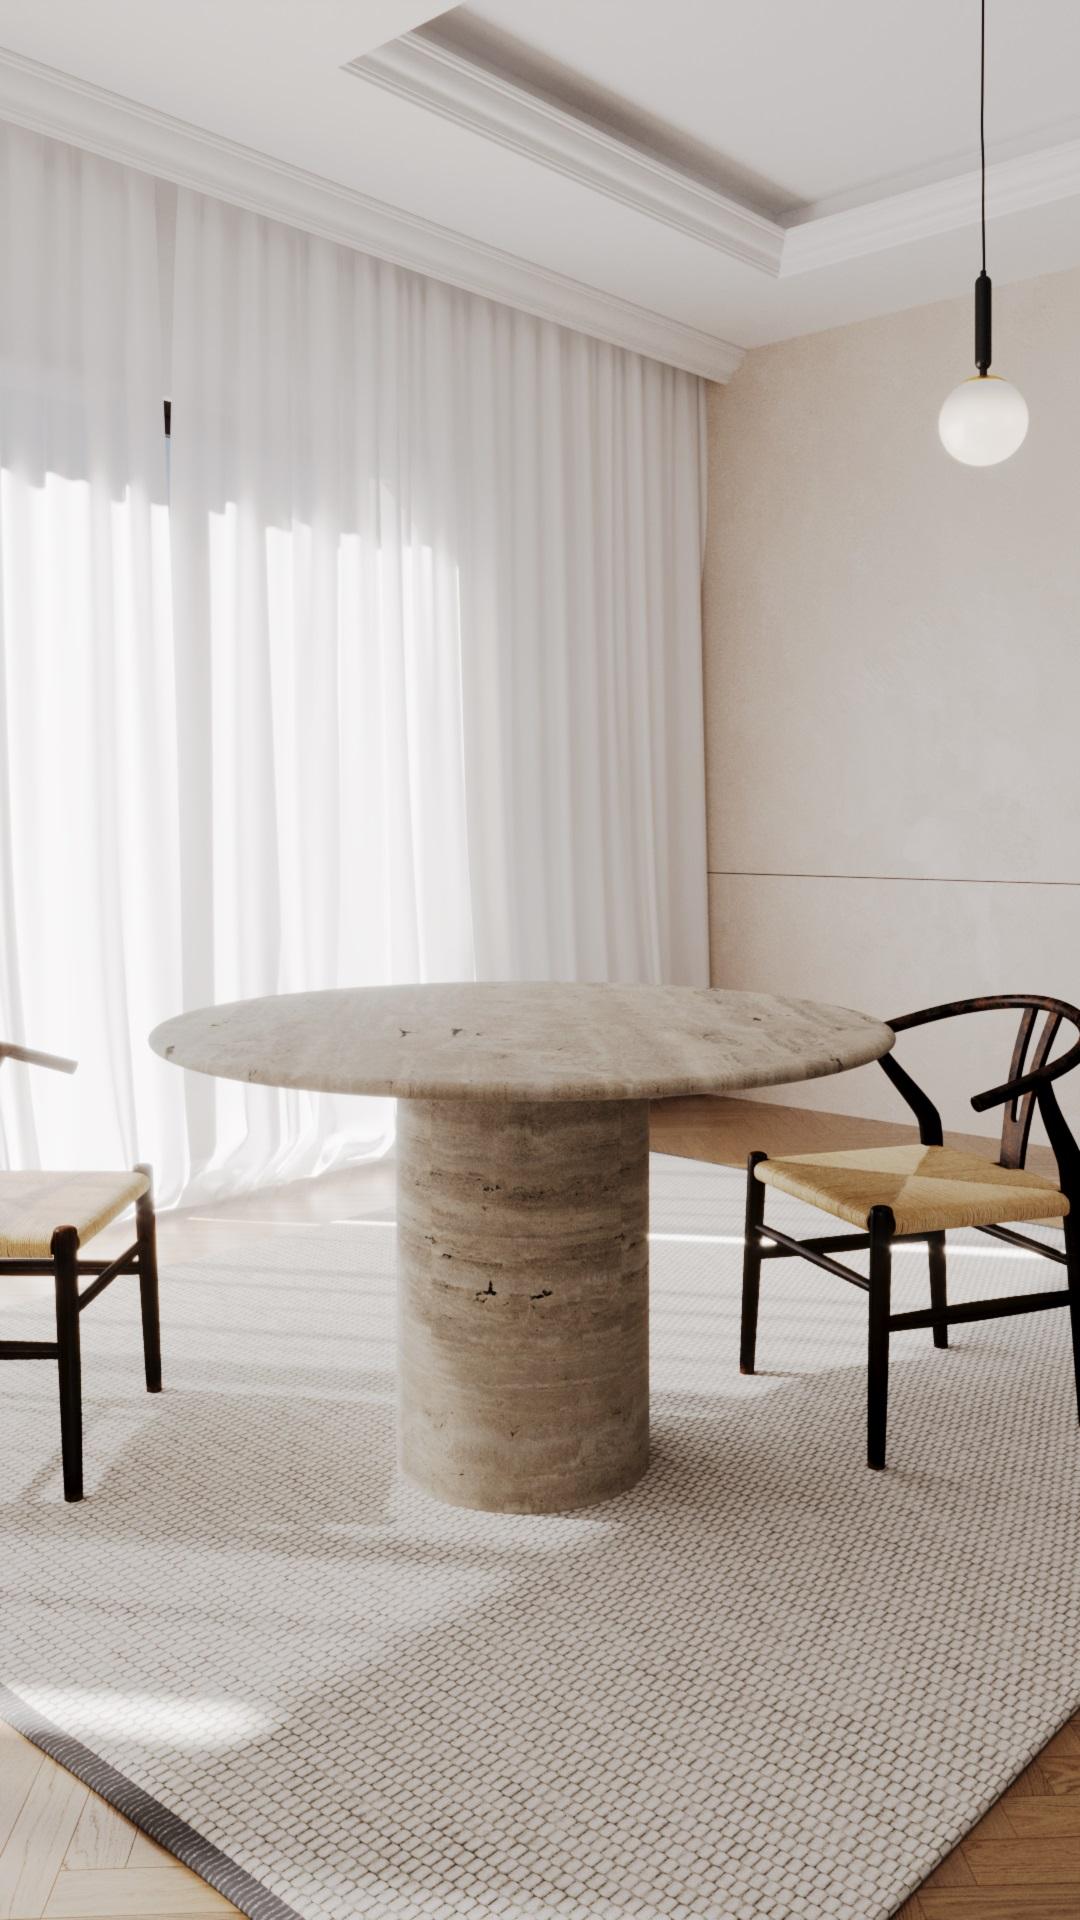 The round dining table takes its inspiration from the organic and flowing forms found in nature. It seamlessly combines the world's finest materials to create connections that are breathtaking in their simplicity. Whether you're enjoying a